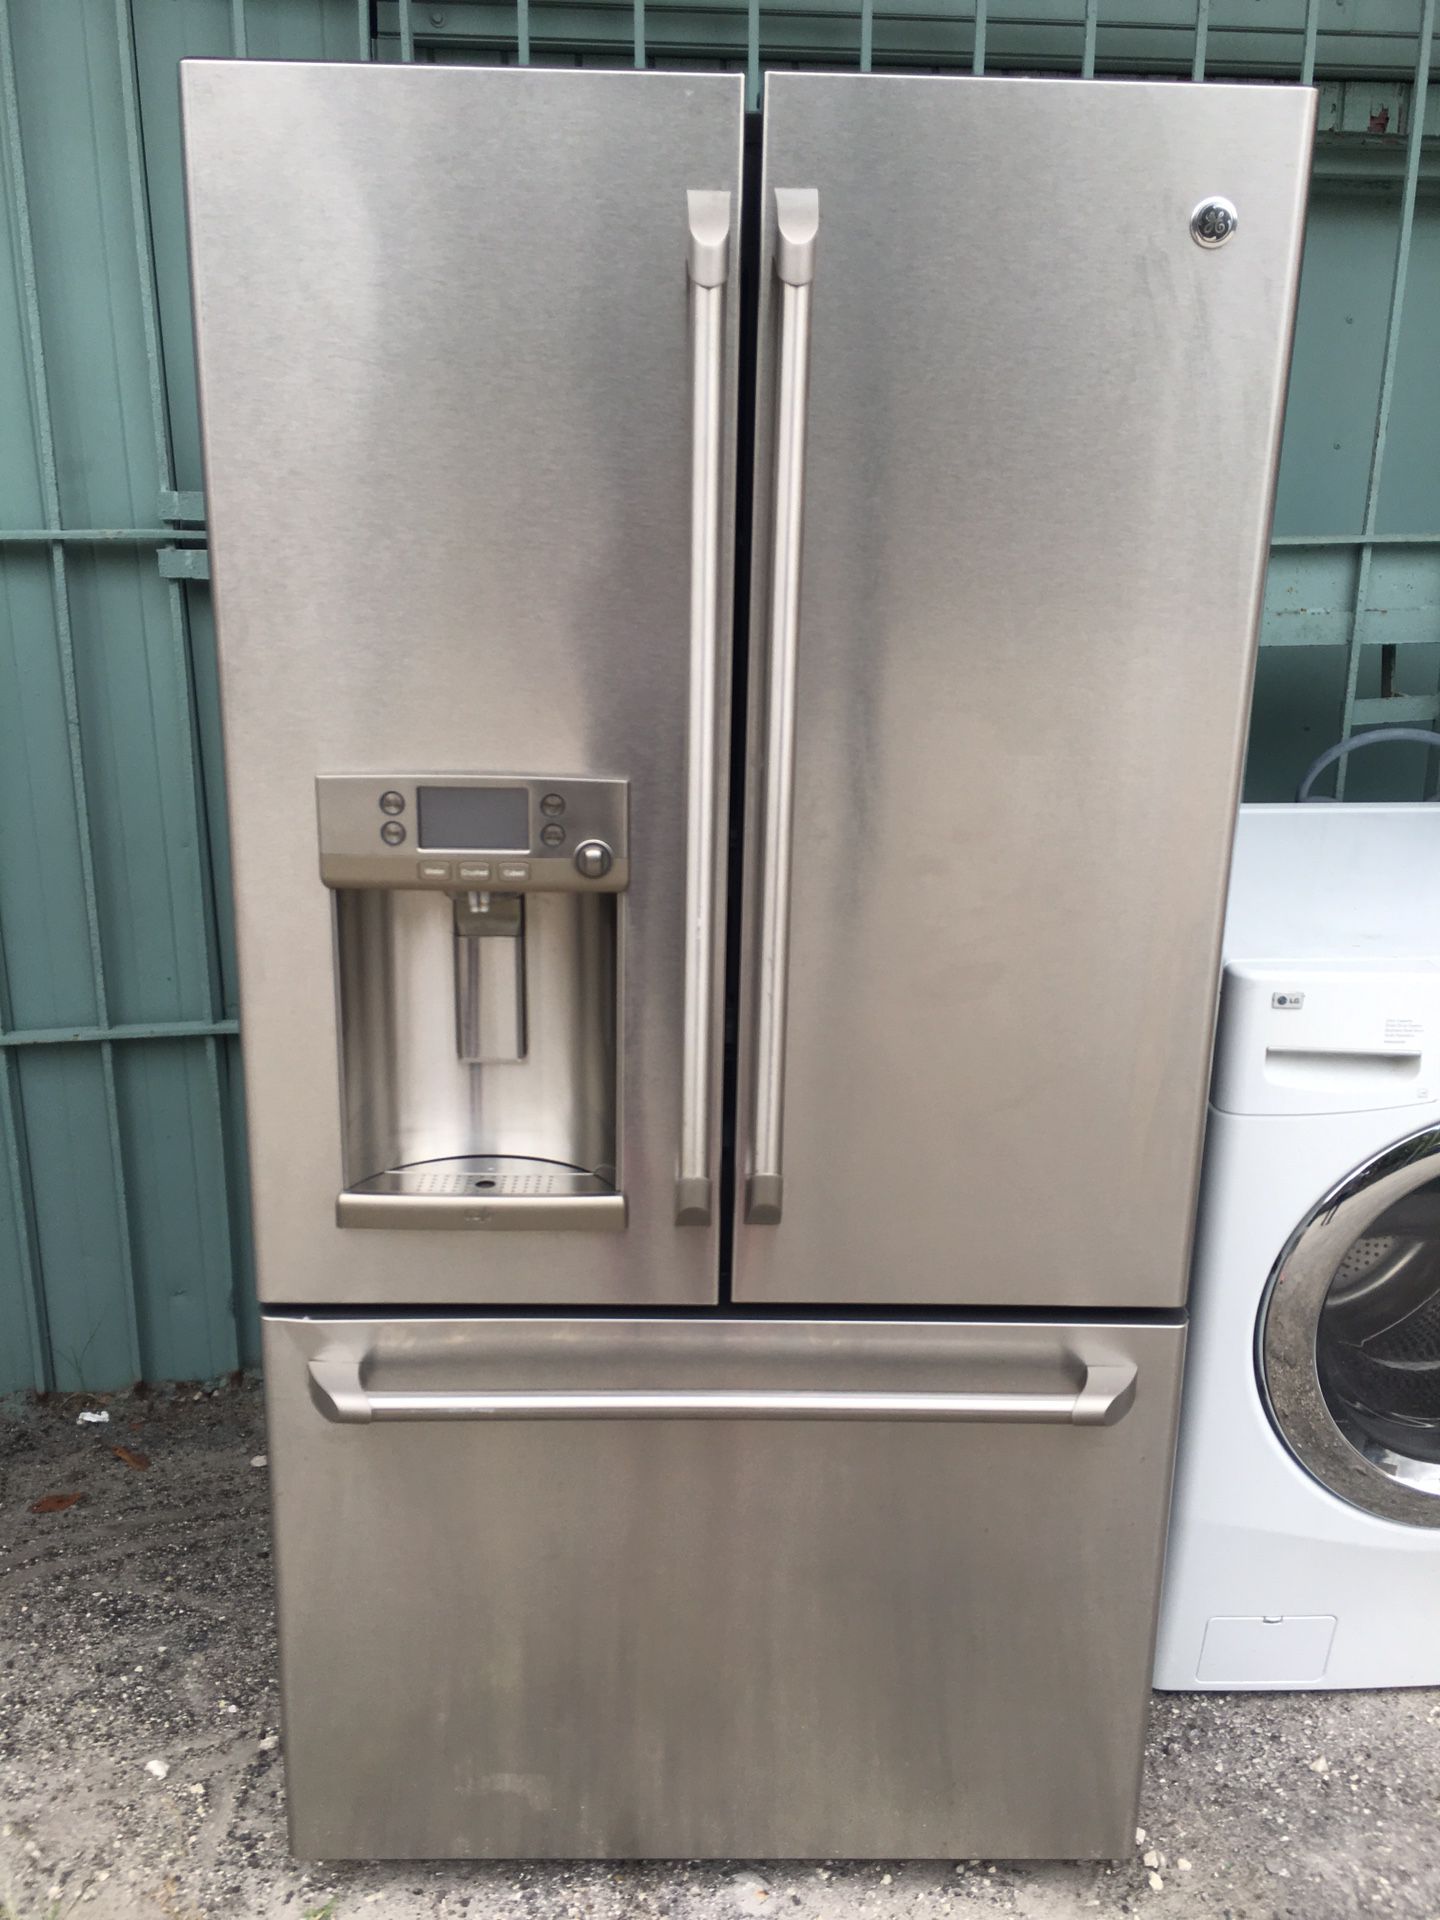 General Electric Stainless Steel Refrigerator! French Doors! 3 months of warranty and fast delivery